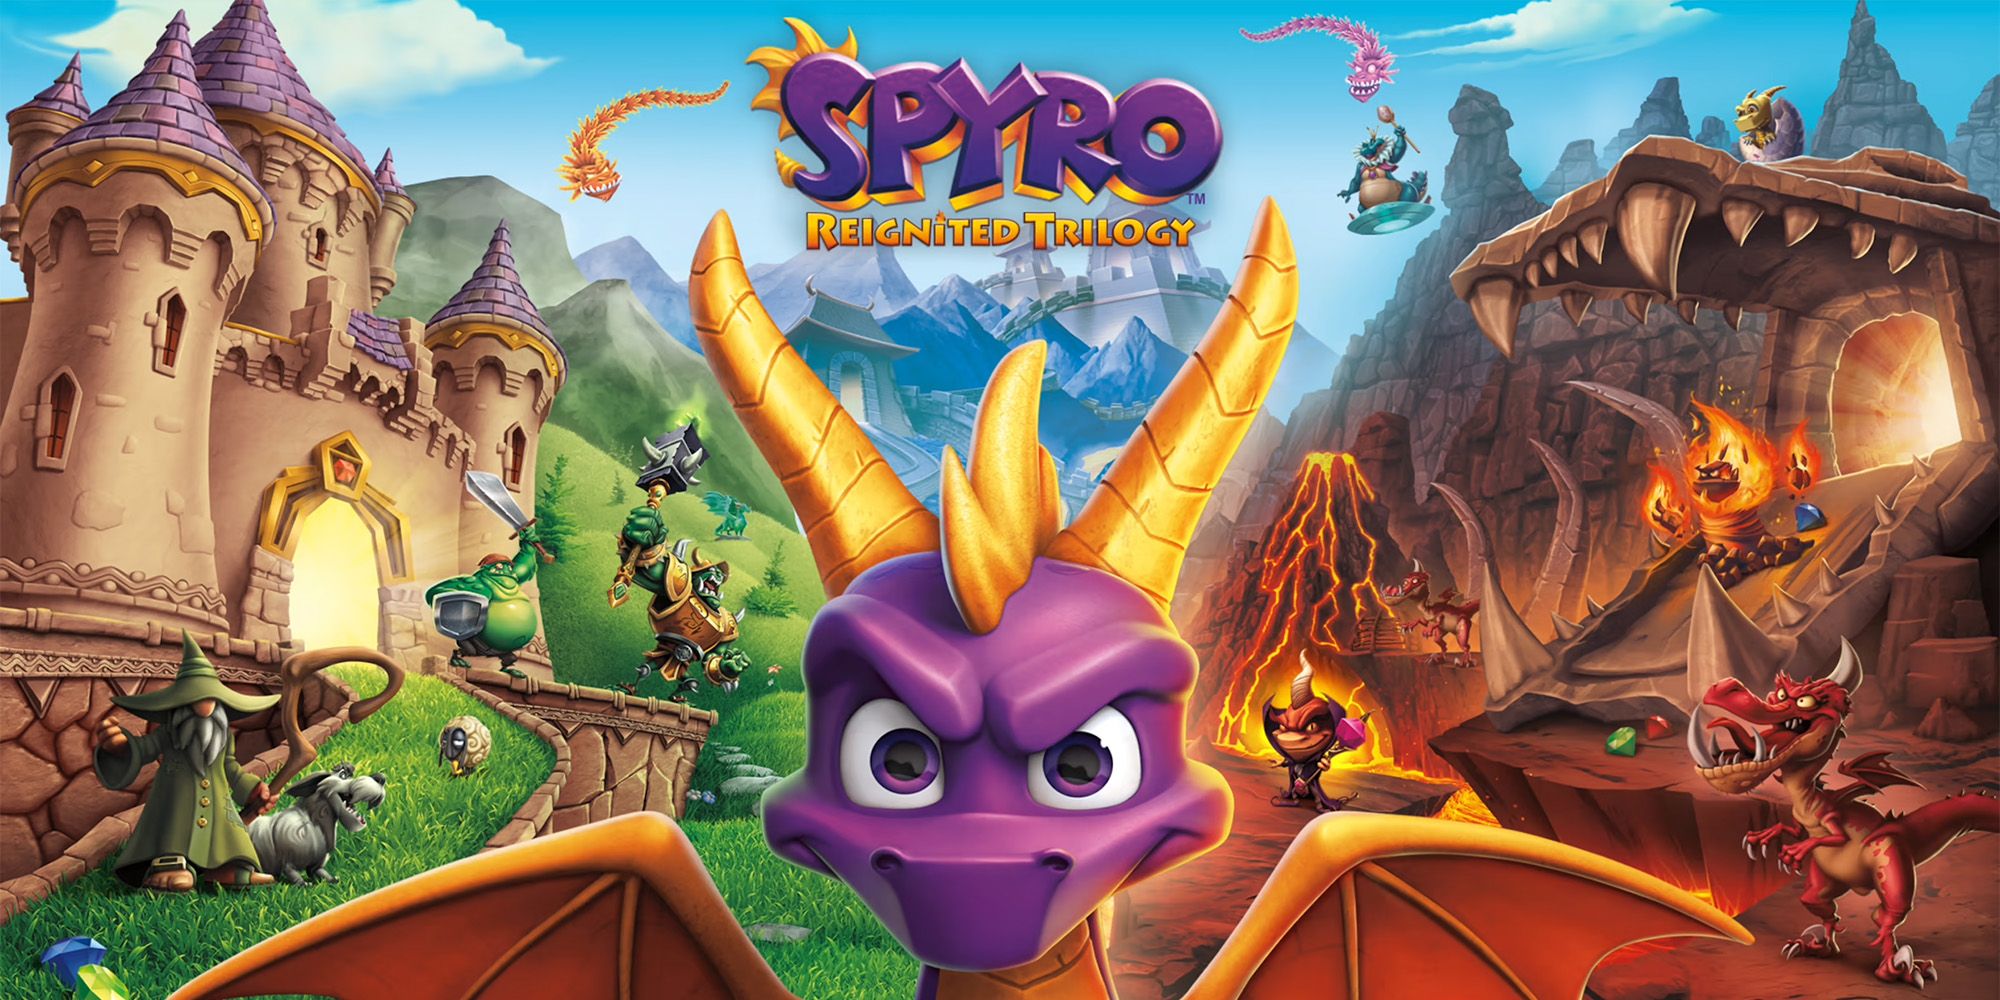 Spyro Reignited Trilogy - Spyro Standing At A Border Between To Fighting Kingdoms